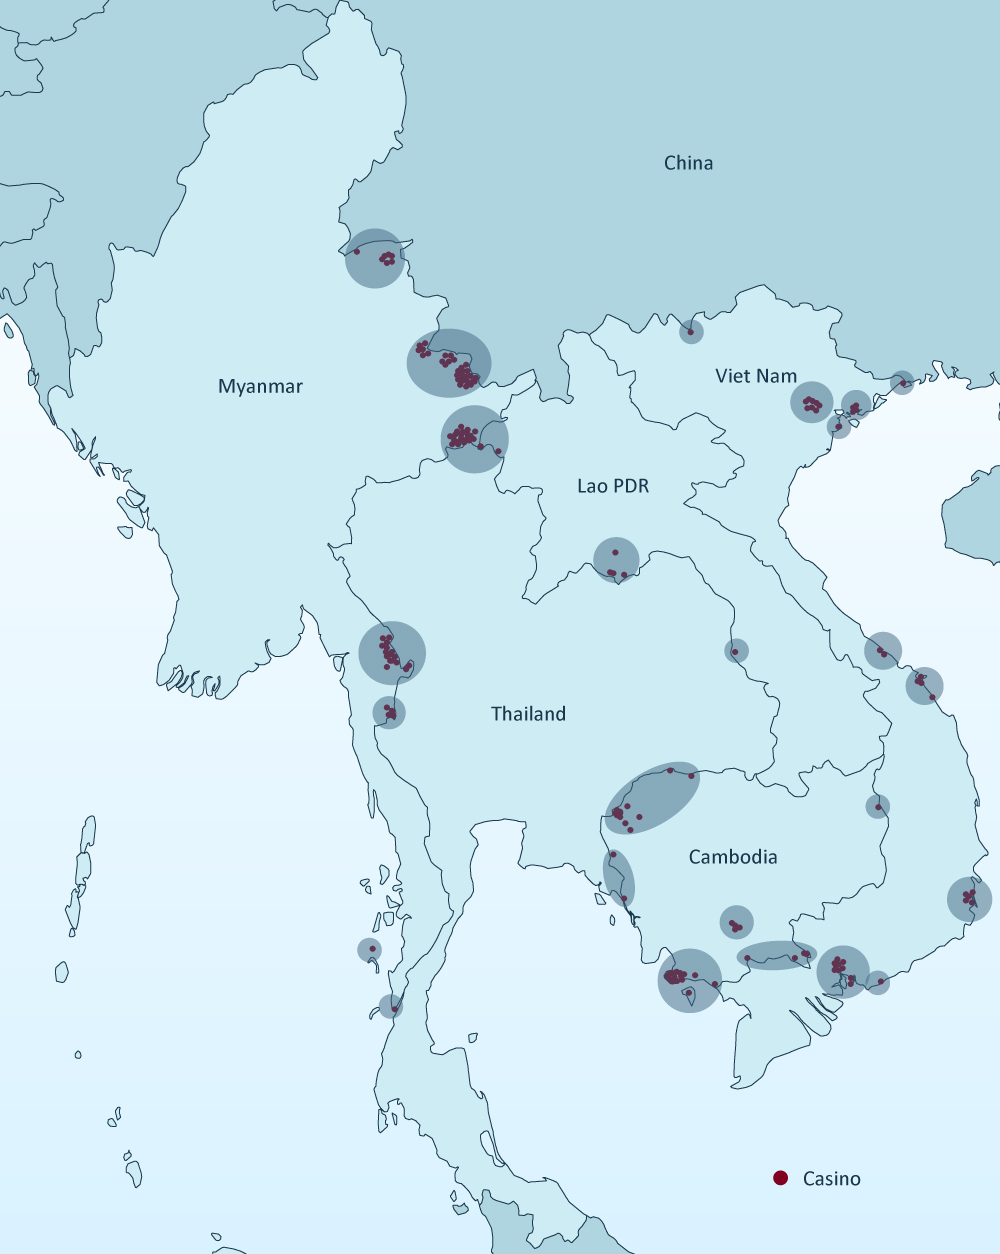 Locations of casinos in lower Mekong countries in 2022 where they are engaged in cryptocurrency scams. Source: UNODC elaboration based on information obtained through various channels, including its Country Offices in Southeast Asia and field researchers.